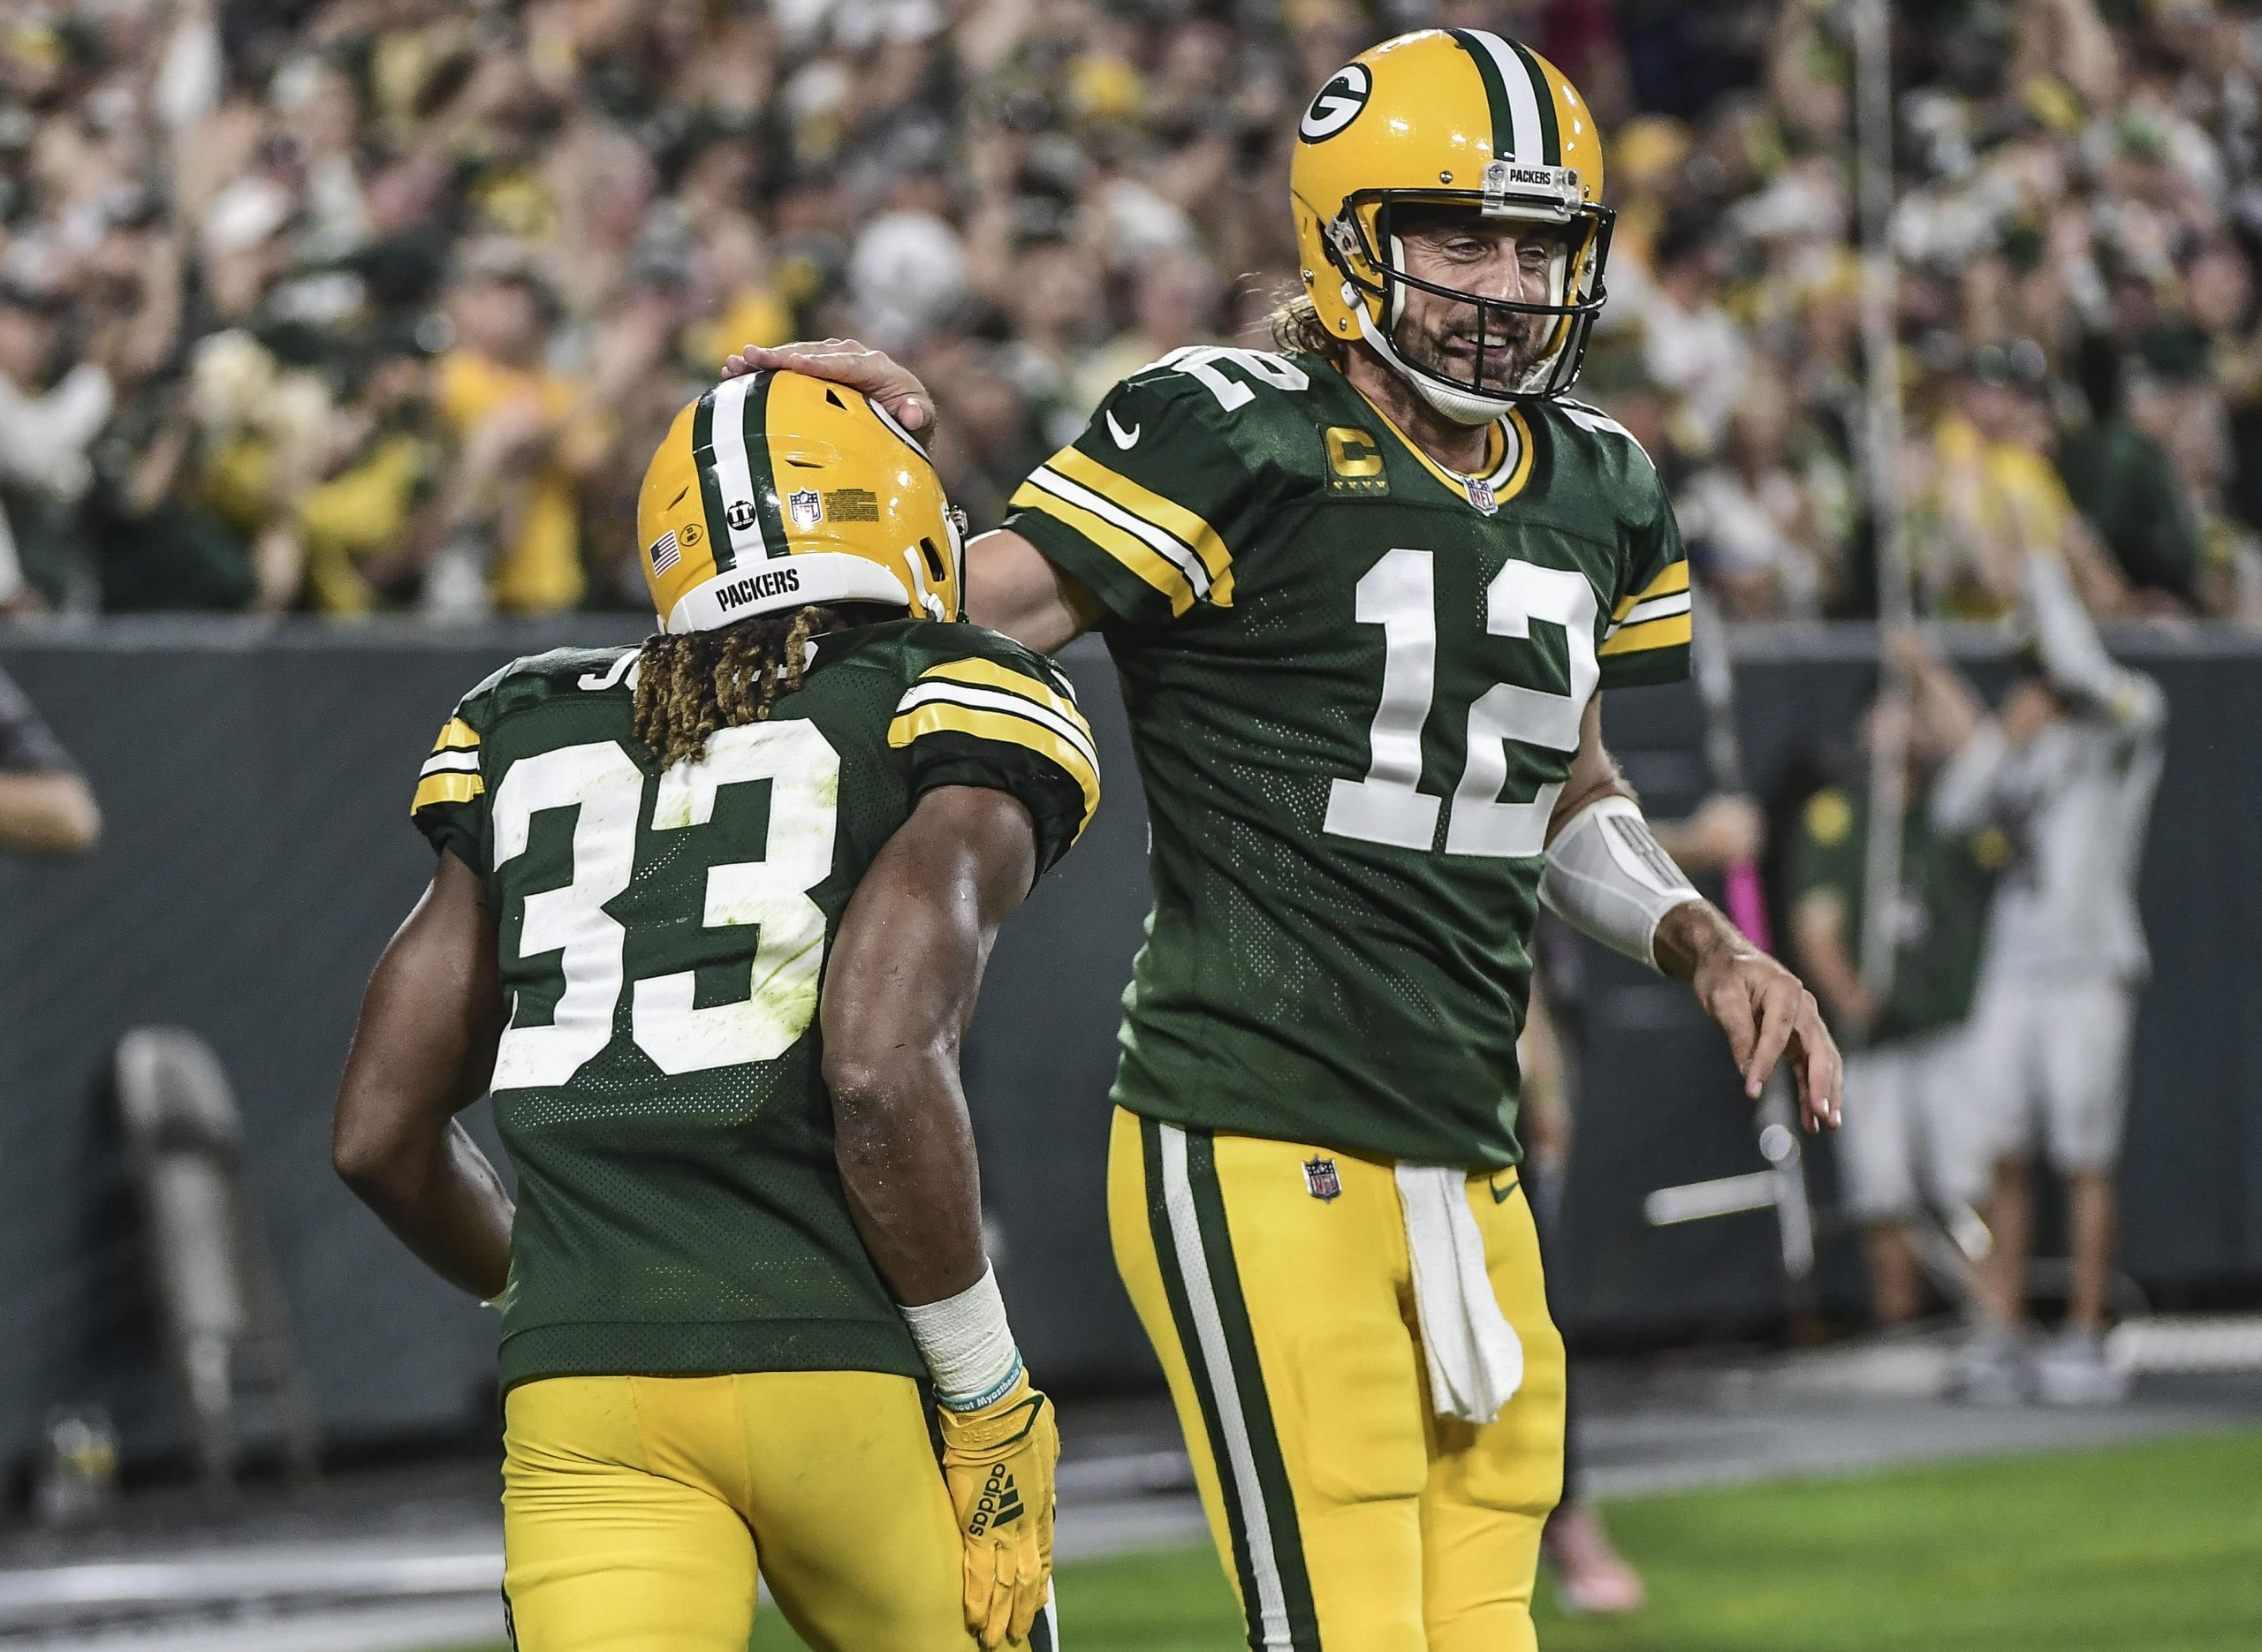 Green Bay Packers running back Aaron Jones (33) celebrates with quarterback Aaron Rodgers (12) after scoring a touchdown against the Detroit Lions in the first quarter at Lambeau Field